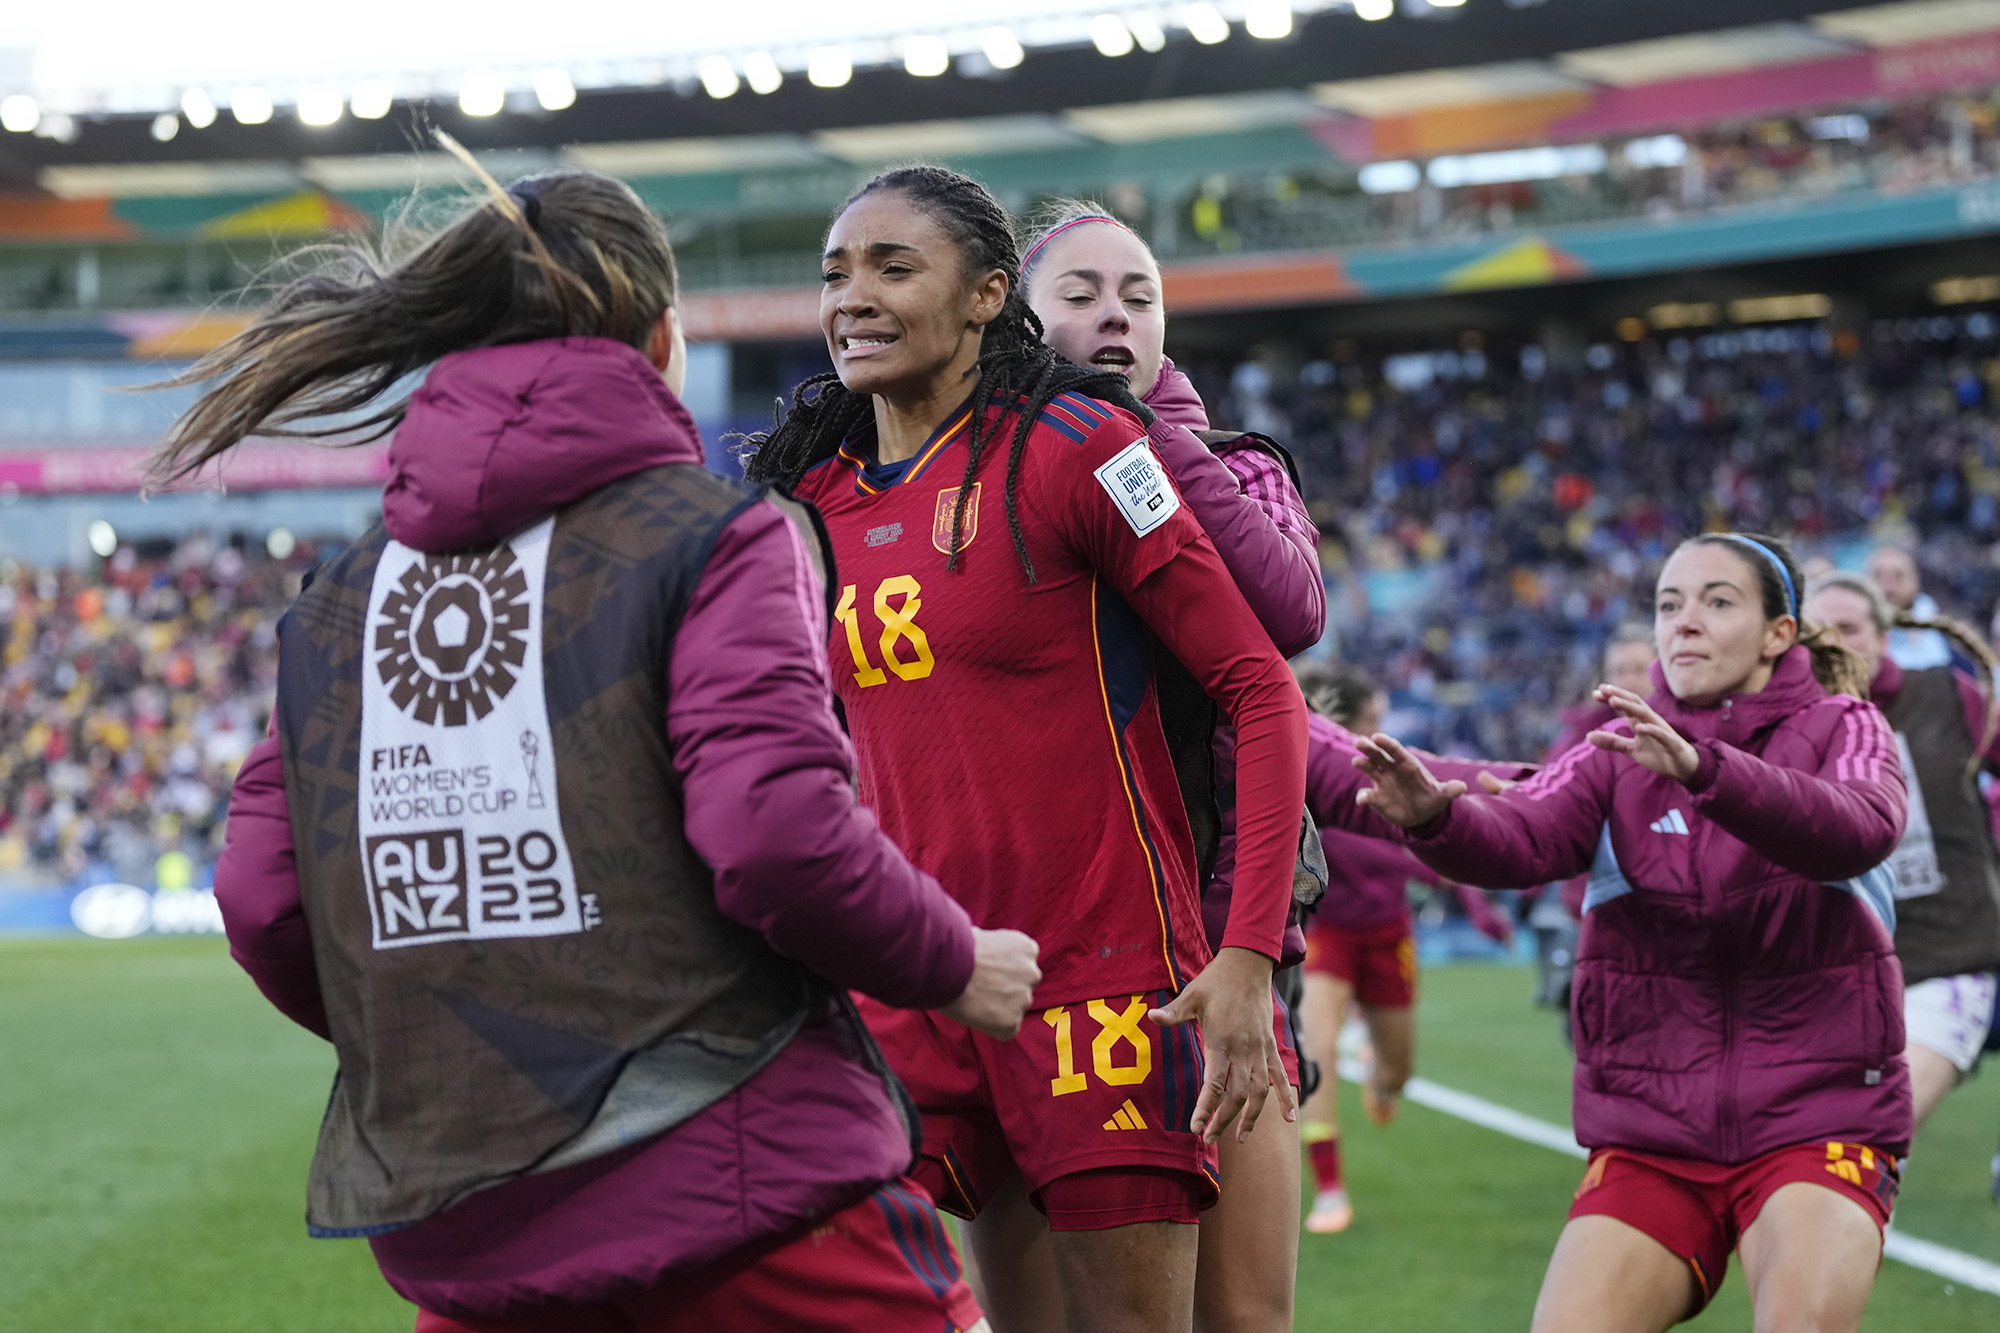 Salma Paralluelo was the hero for Spain in its 2-1 extra-time quarterfinal win over the Netherlands in Wellington.